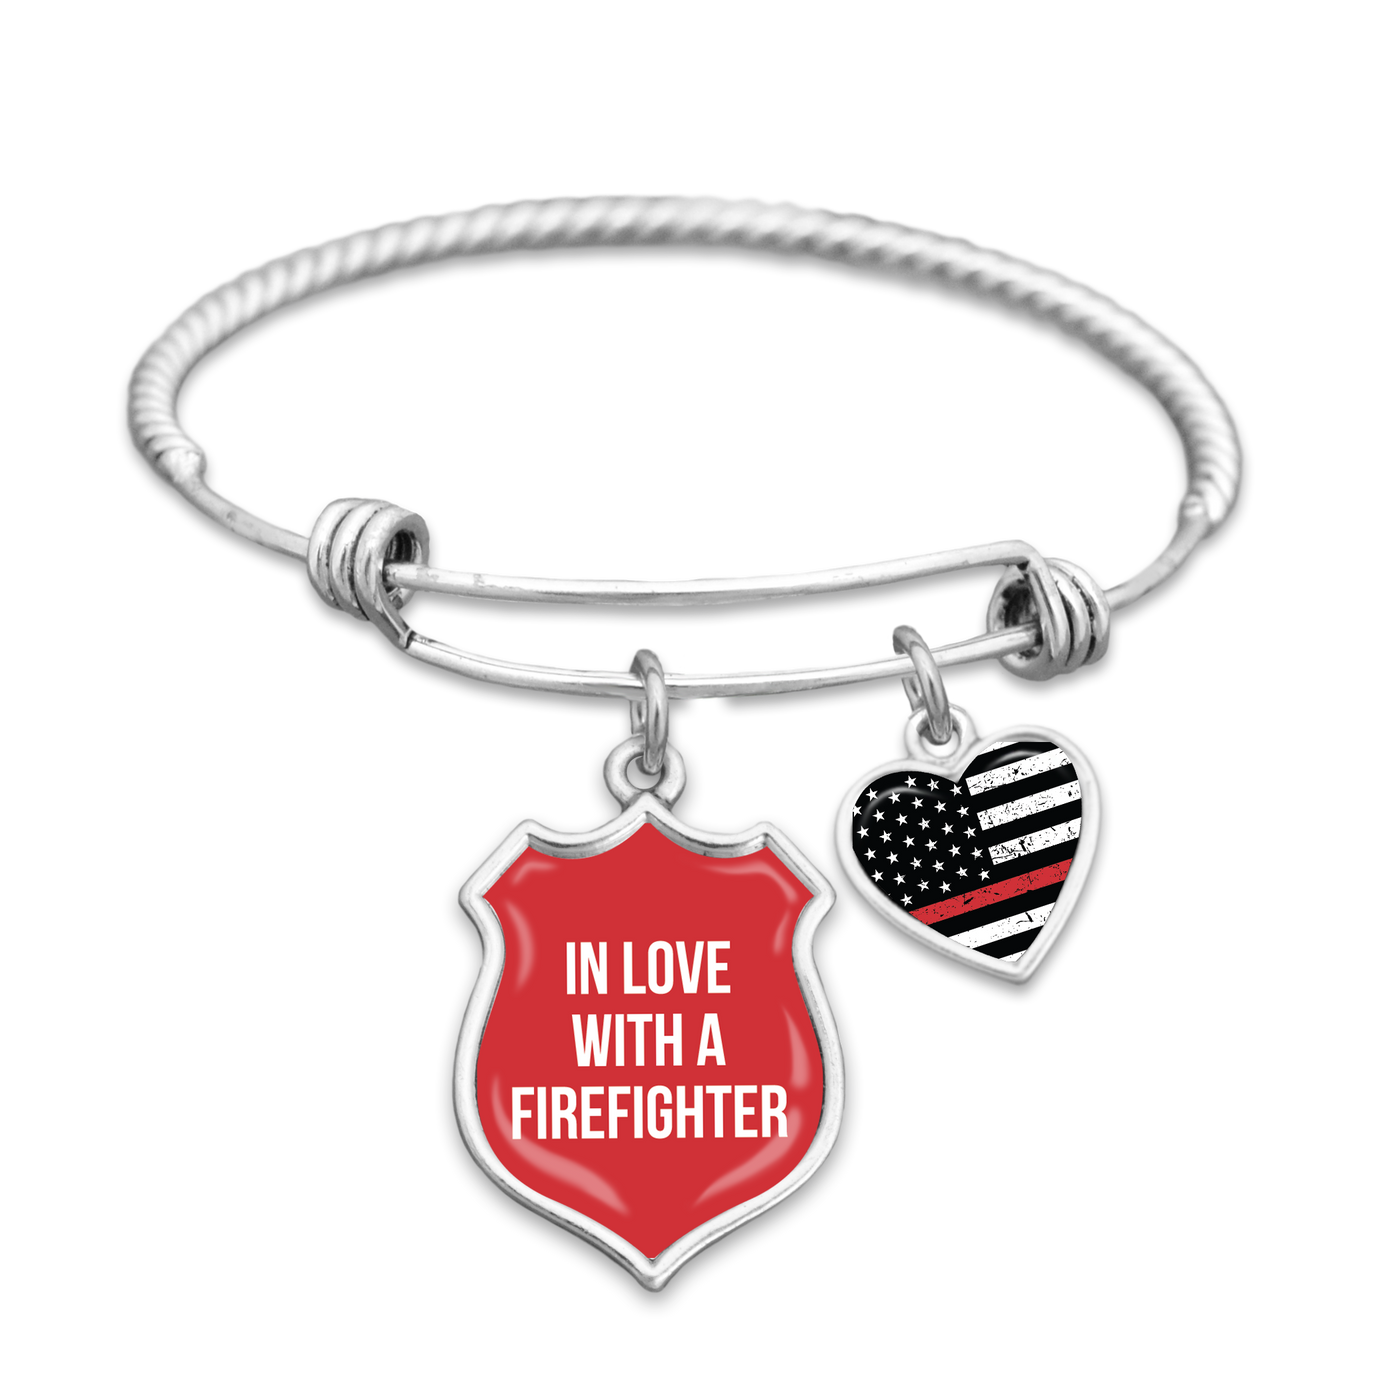 In Love With A Firefighter Thin Red Line Charm Bracelet